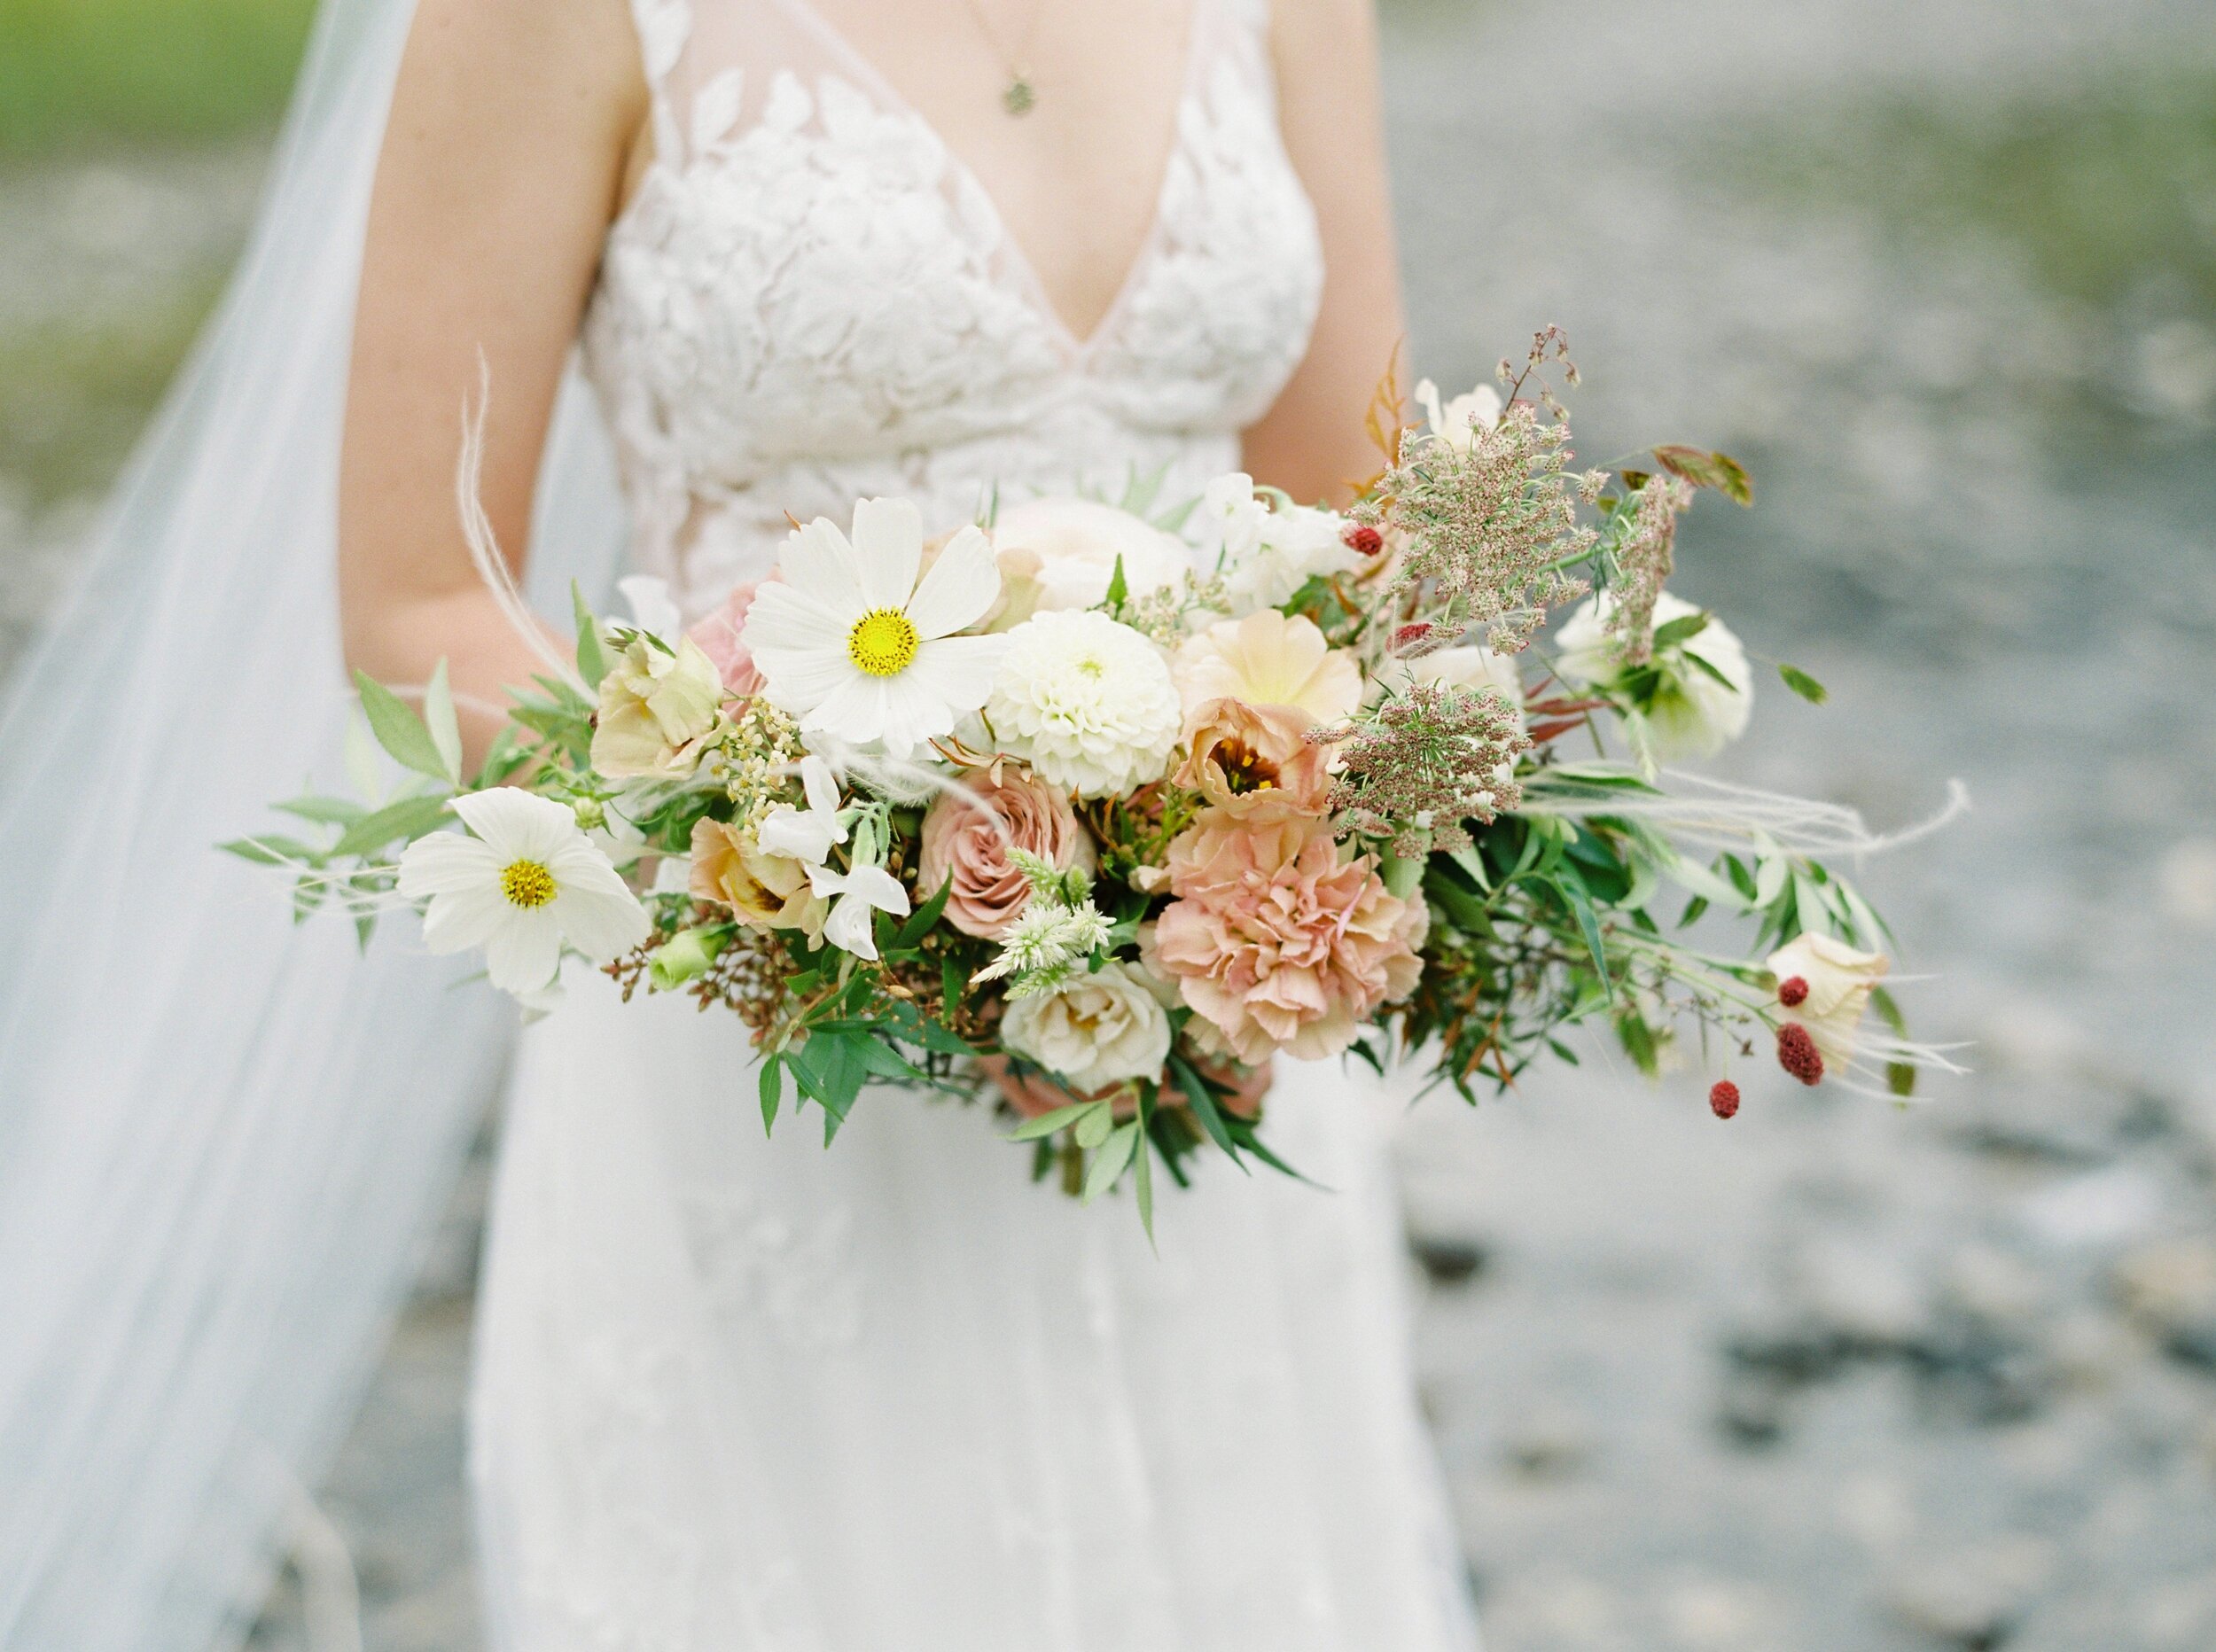  modern light and airy bridal bouquet white and soft pastel caramel colored roses | The Malcom Canmore Wedding Photographer | Fine Art film wedding photoraphy | portra 400 